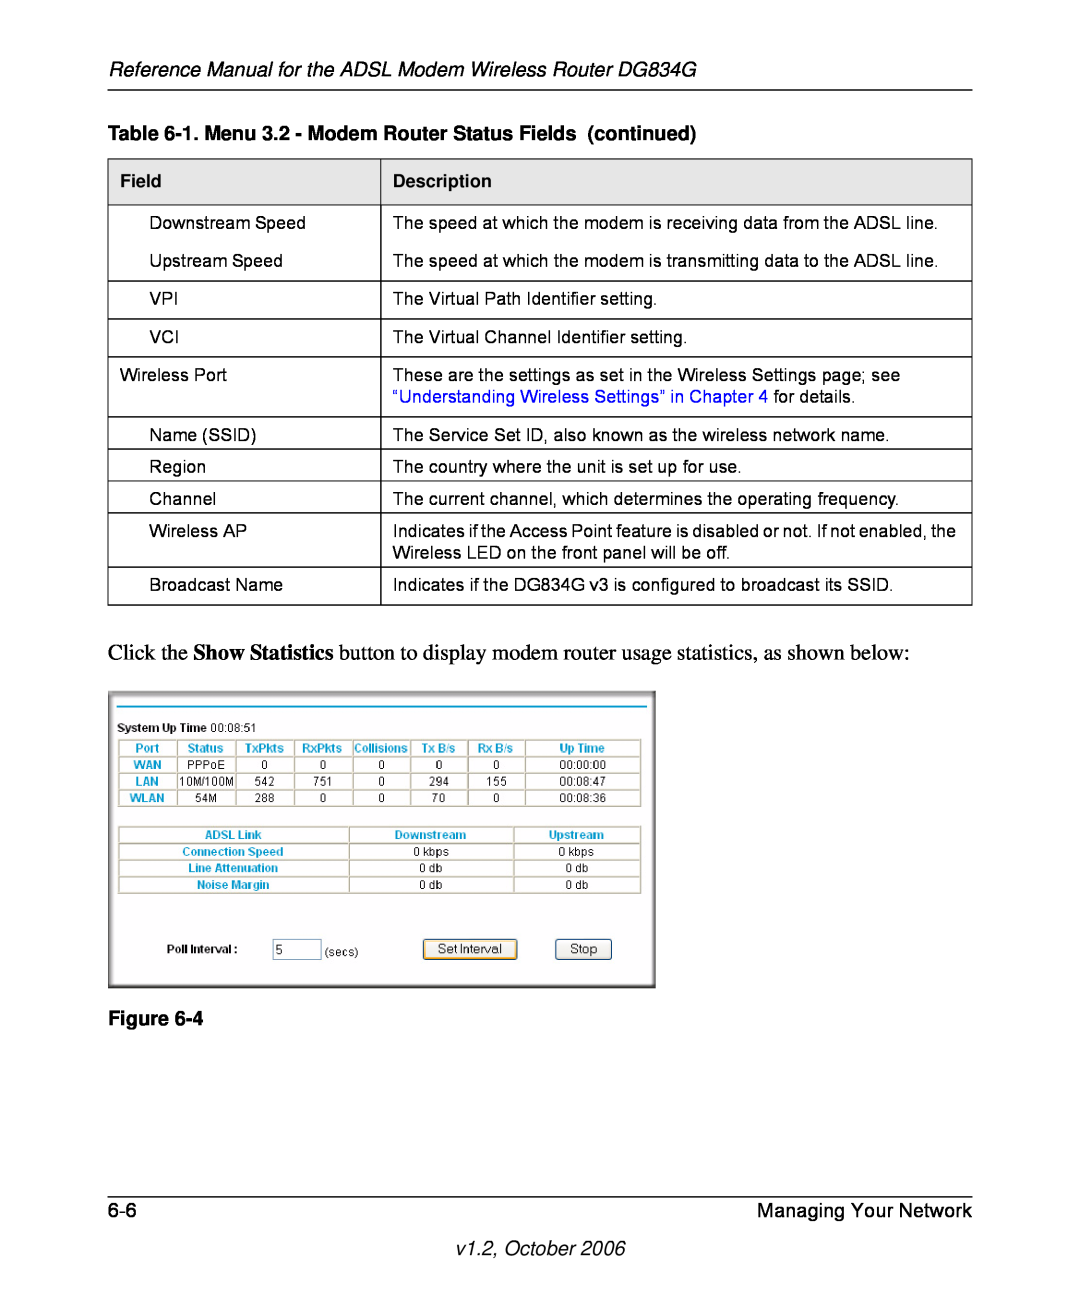 NETGEAR Reference Manual for the ADSL Modem Wireless Router DG834G, 1. Menu 3.2 - Modem Router Status Fields continued 